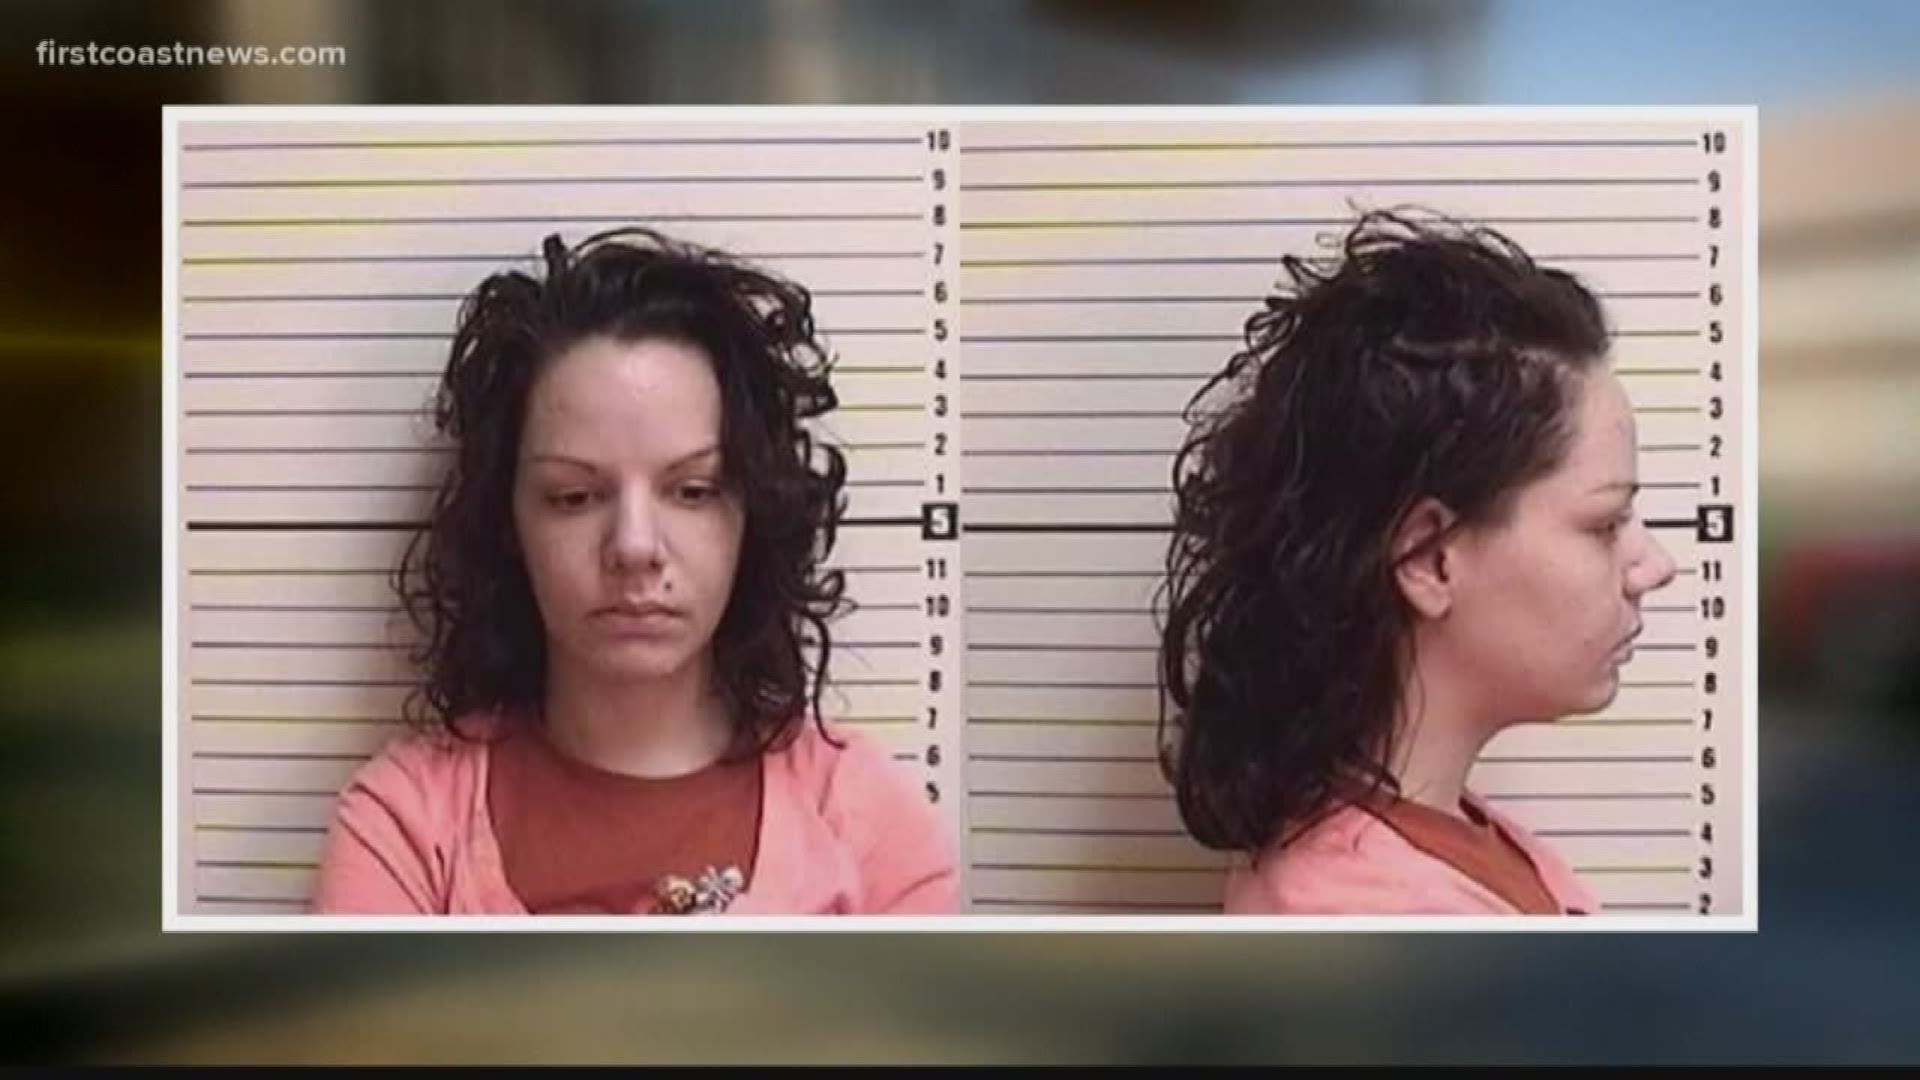 The mother of a 7-month-old child who died last week in Kingsland, Georgia is being charged with involuntary manslaughter and cruelty to a child, according to new details from Camden County Sheriff?s Office.